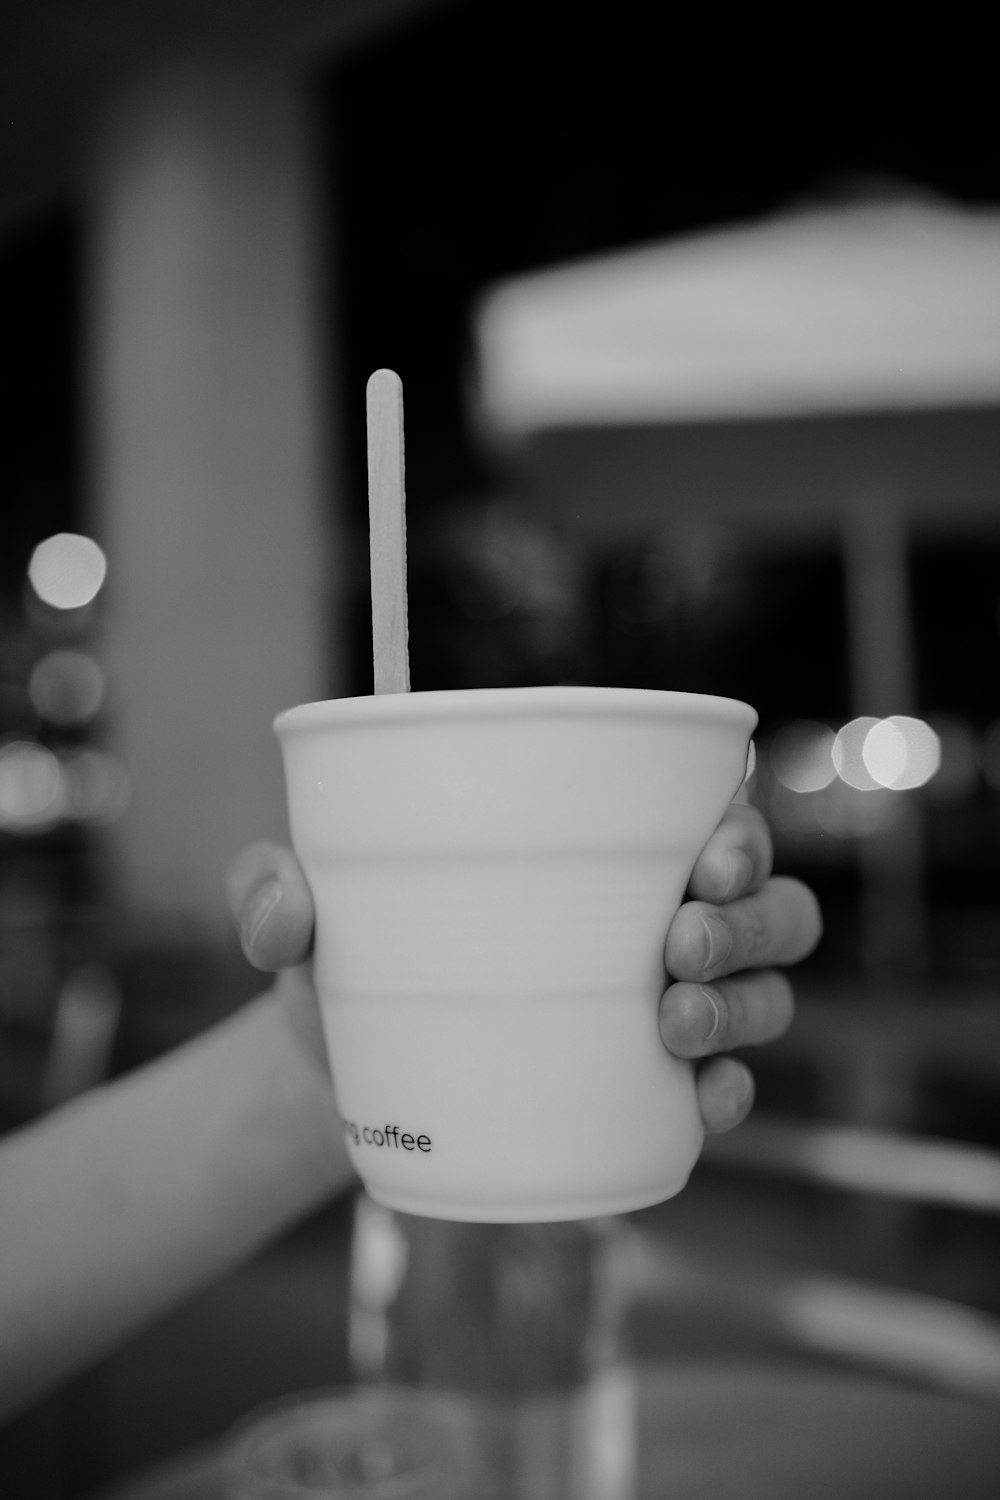 a person holding a cup with a straw in it